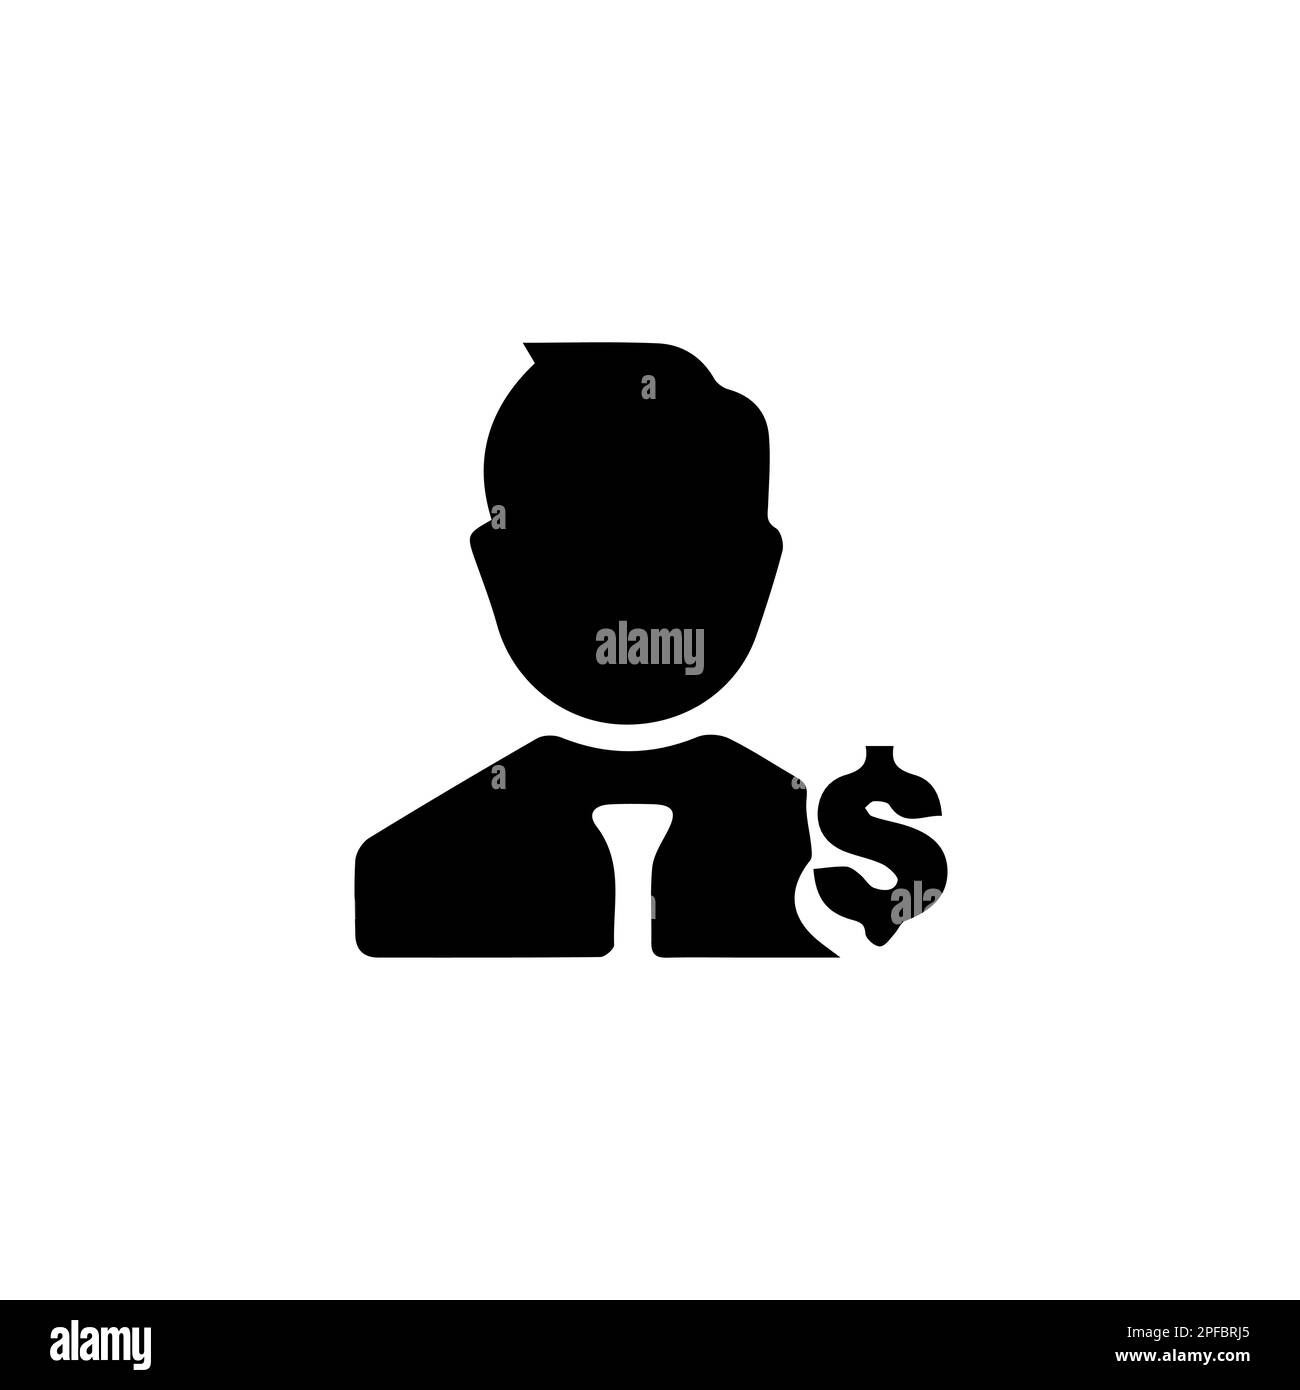 A businessman graph icon. Shareholder icon. Investment. Entrepreneur. Businessman. Vector icon isolated on white background. Stock Vector